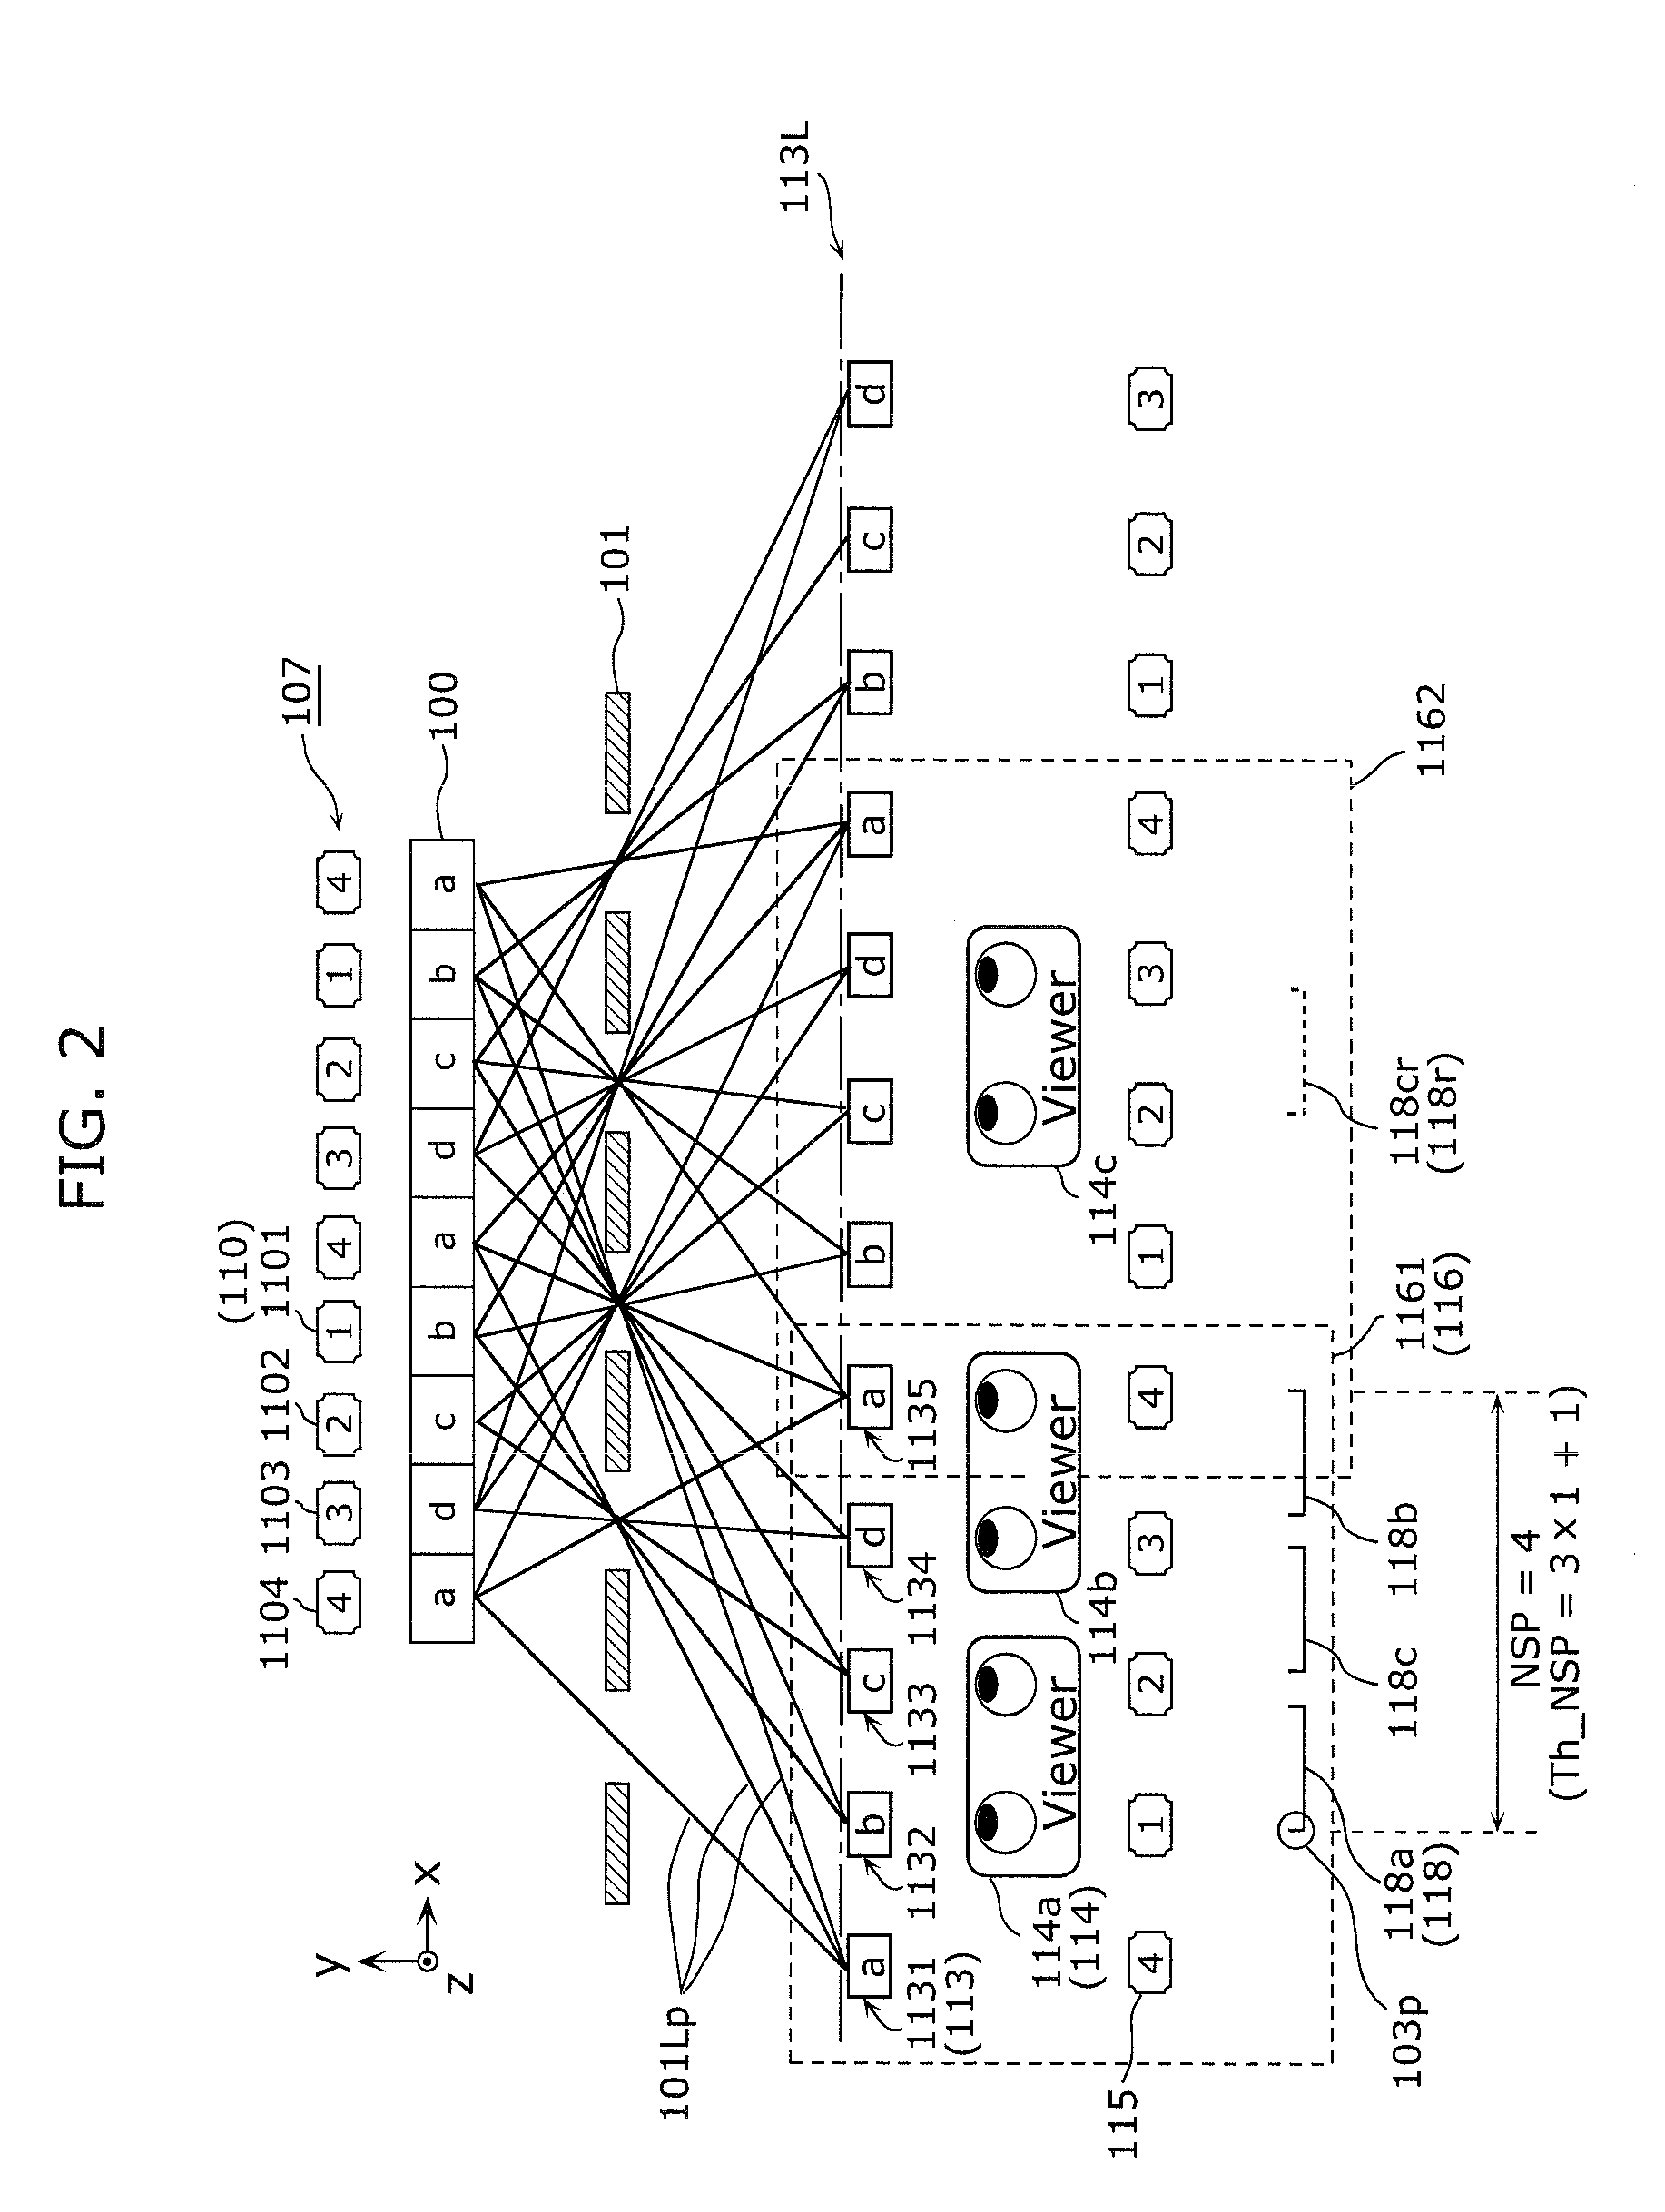 Stereoscopic video display apparatus and stereoscopic video display method